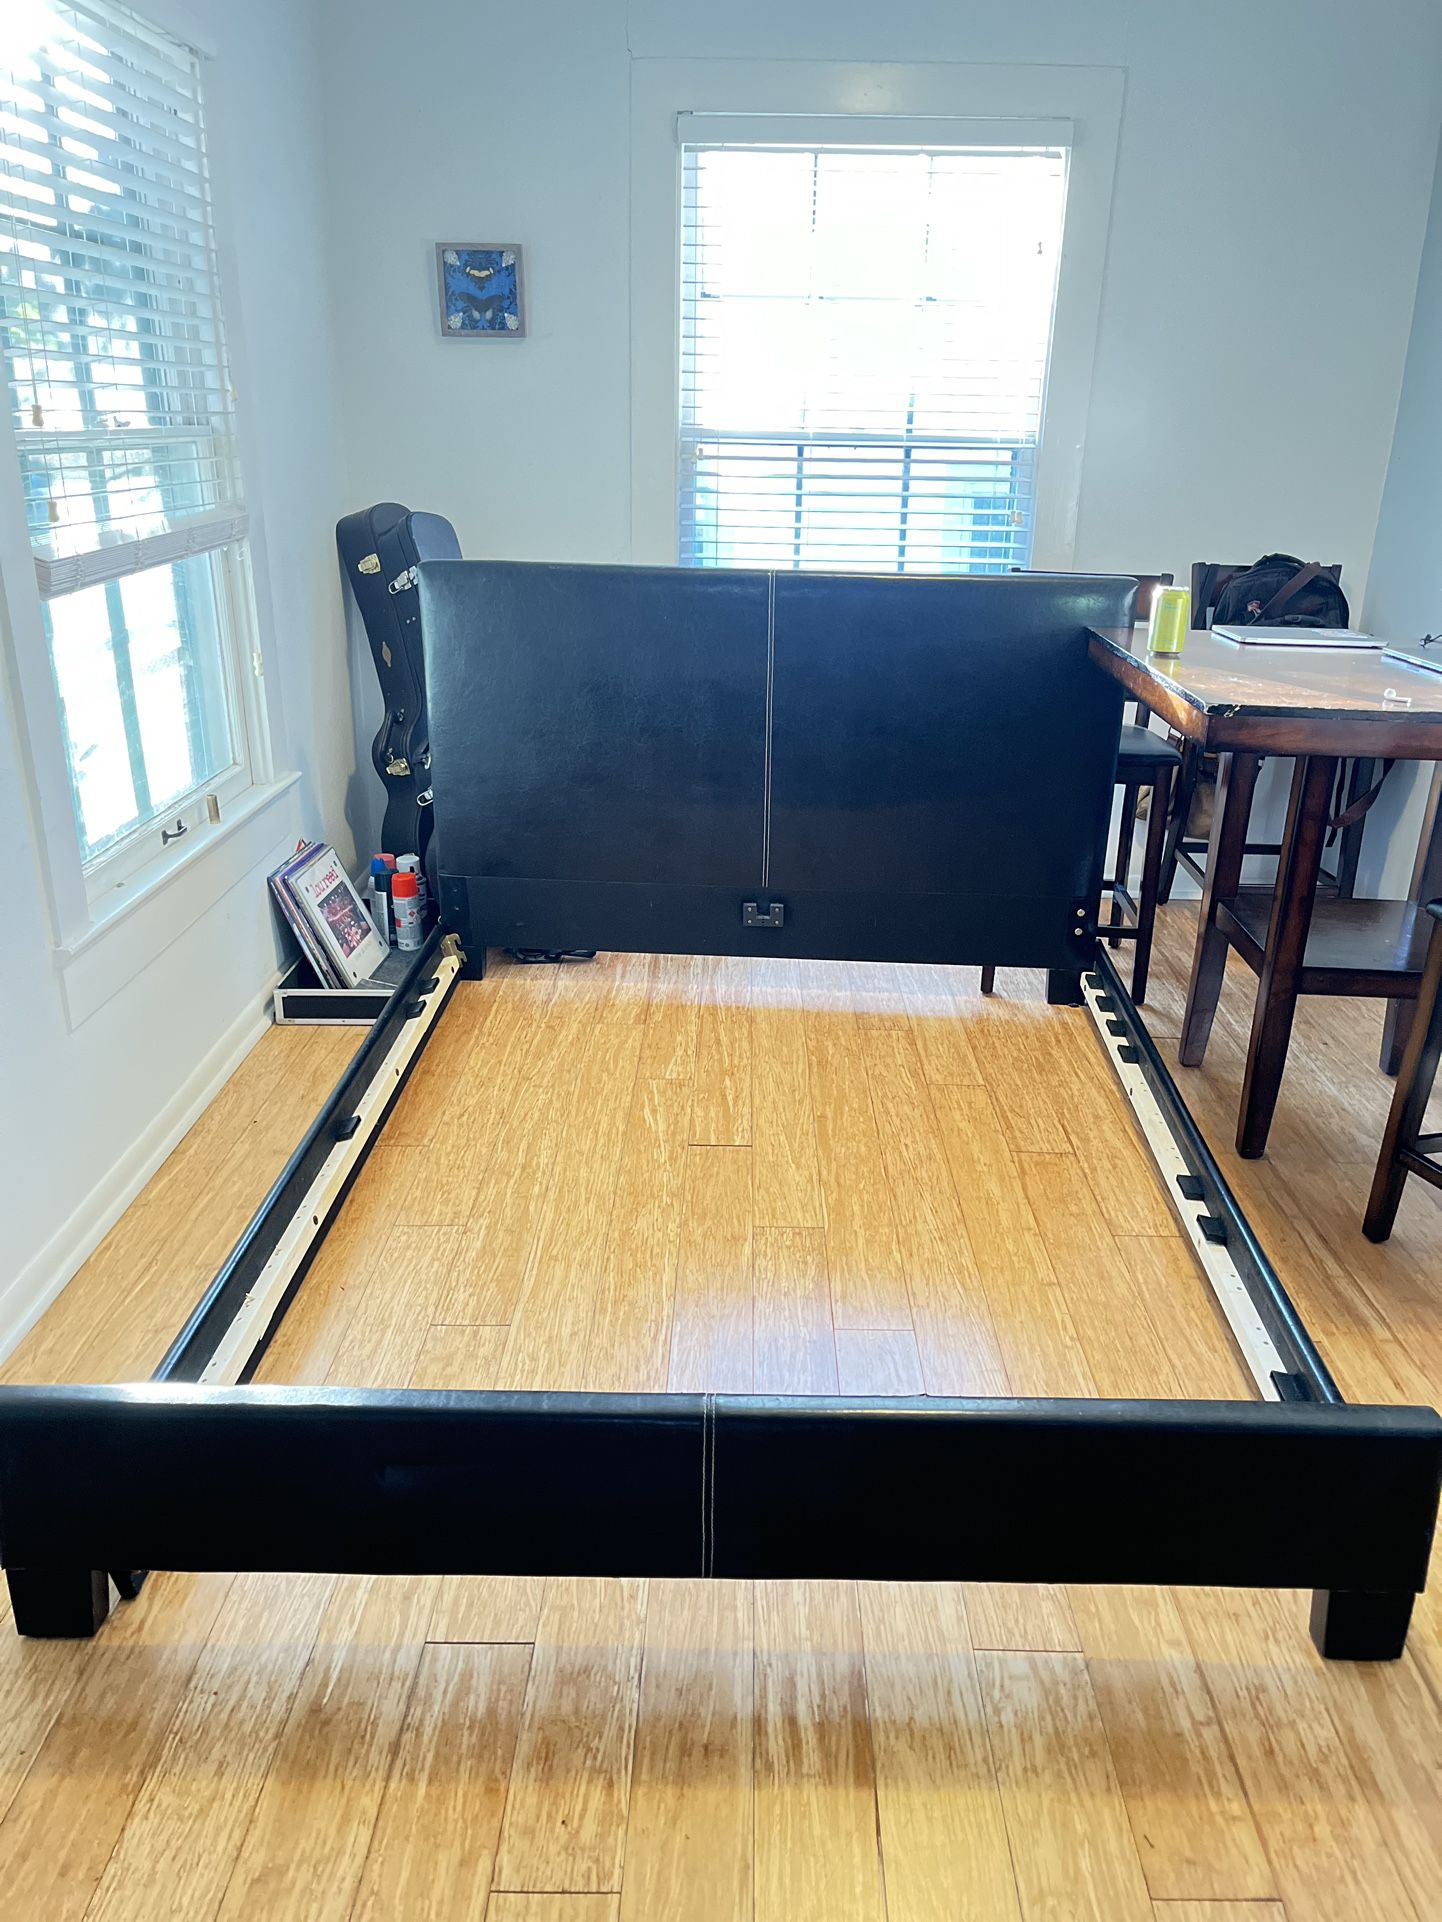 Queen Sized Bed Frame, $100